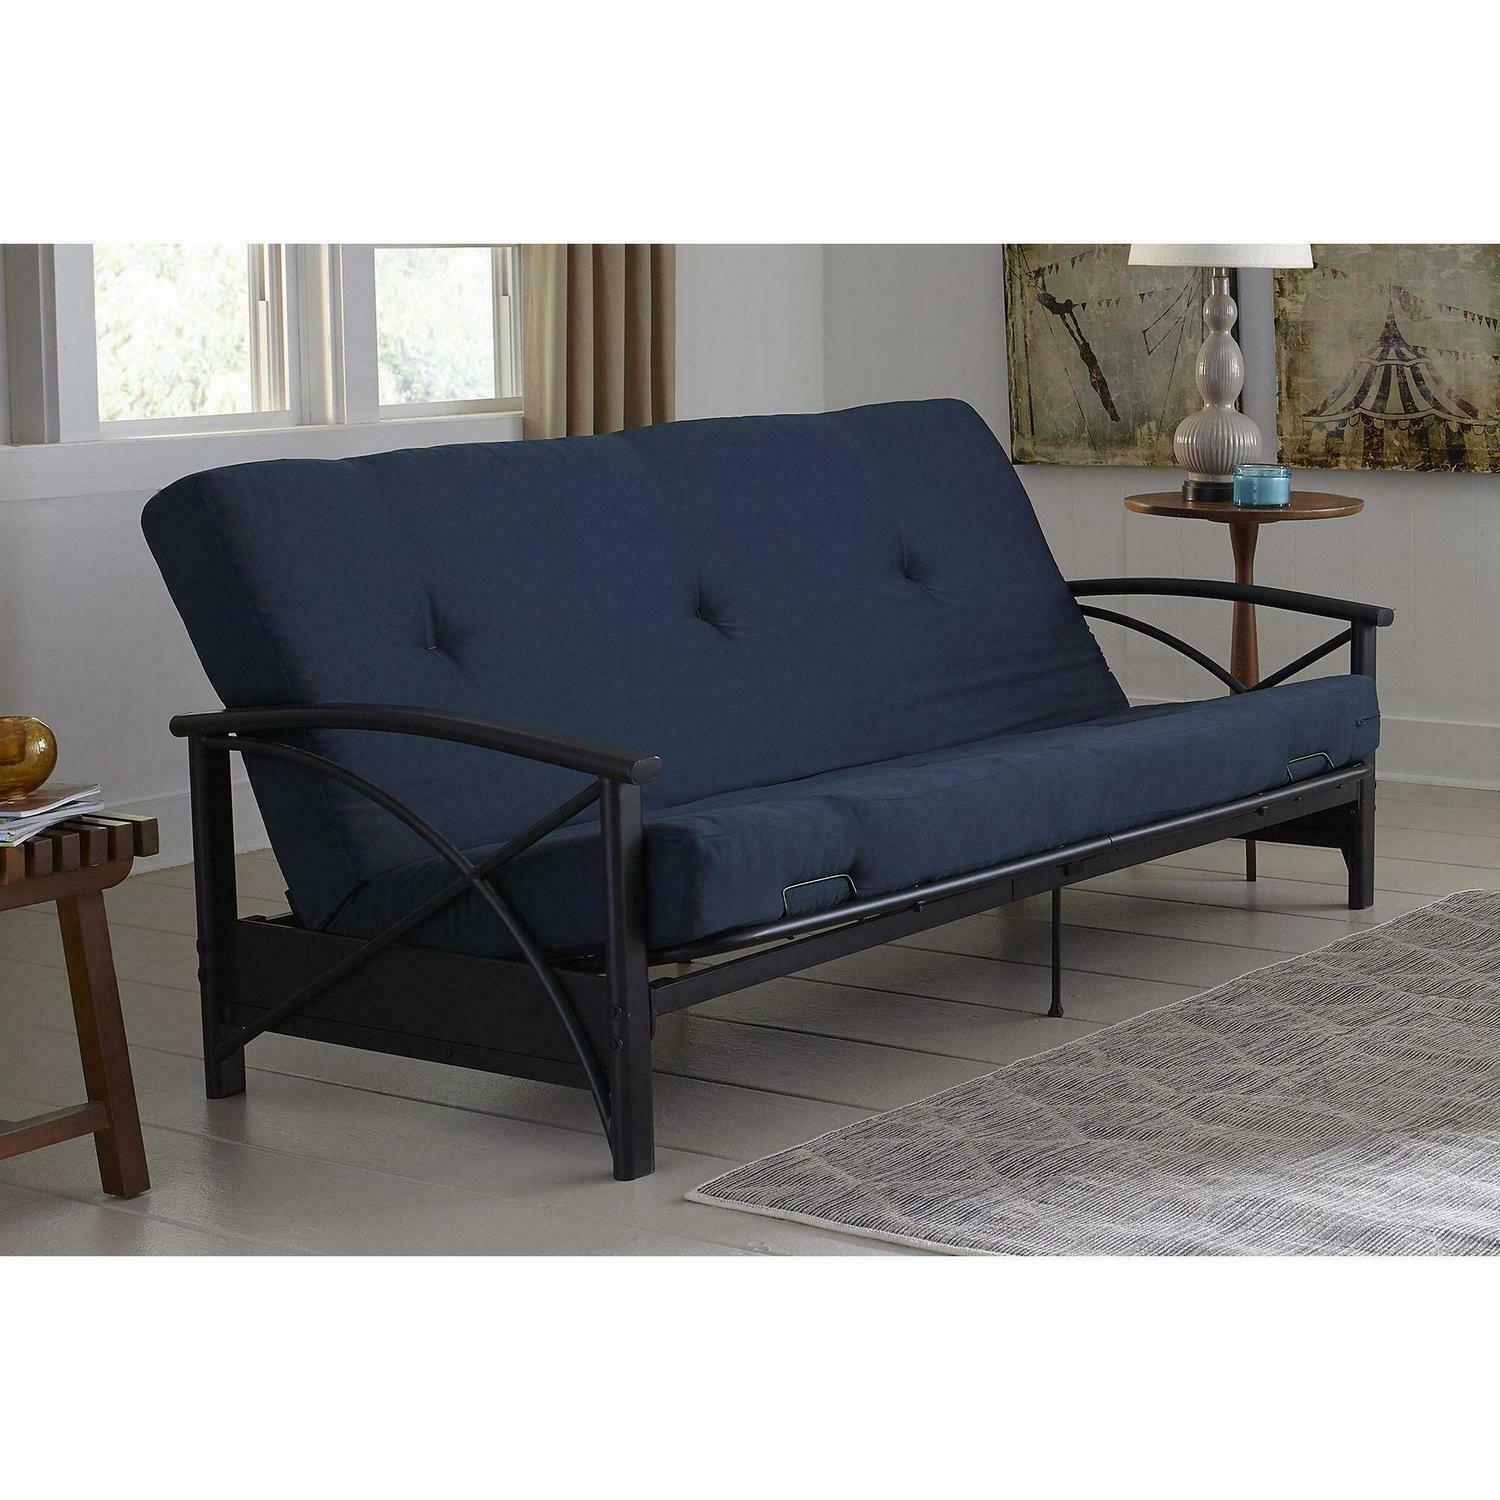 Futon Mattress Guest Spare Room Sofa Bed Full Size Couch Comfortable Blue New